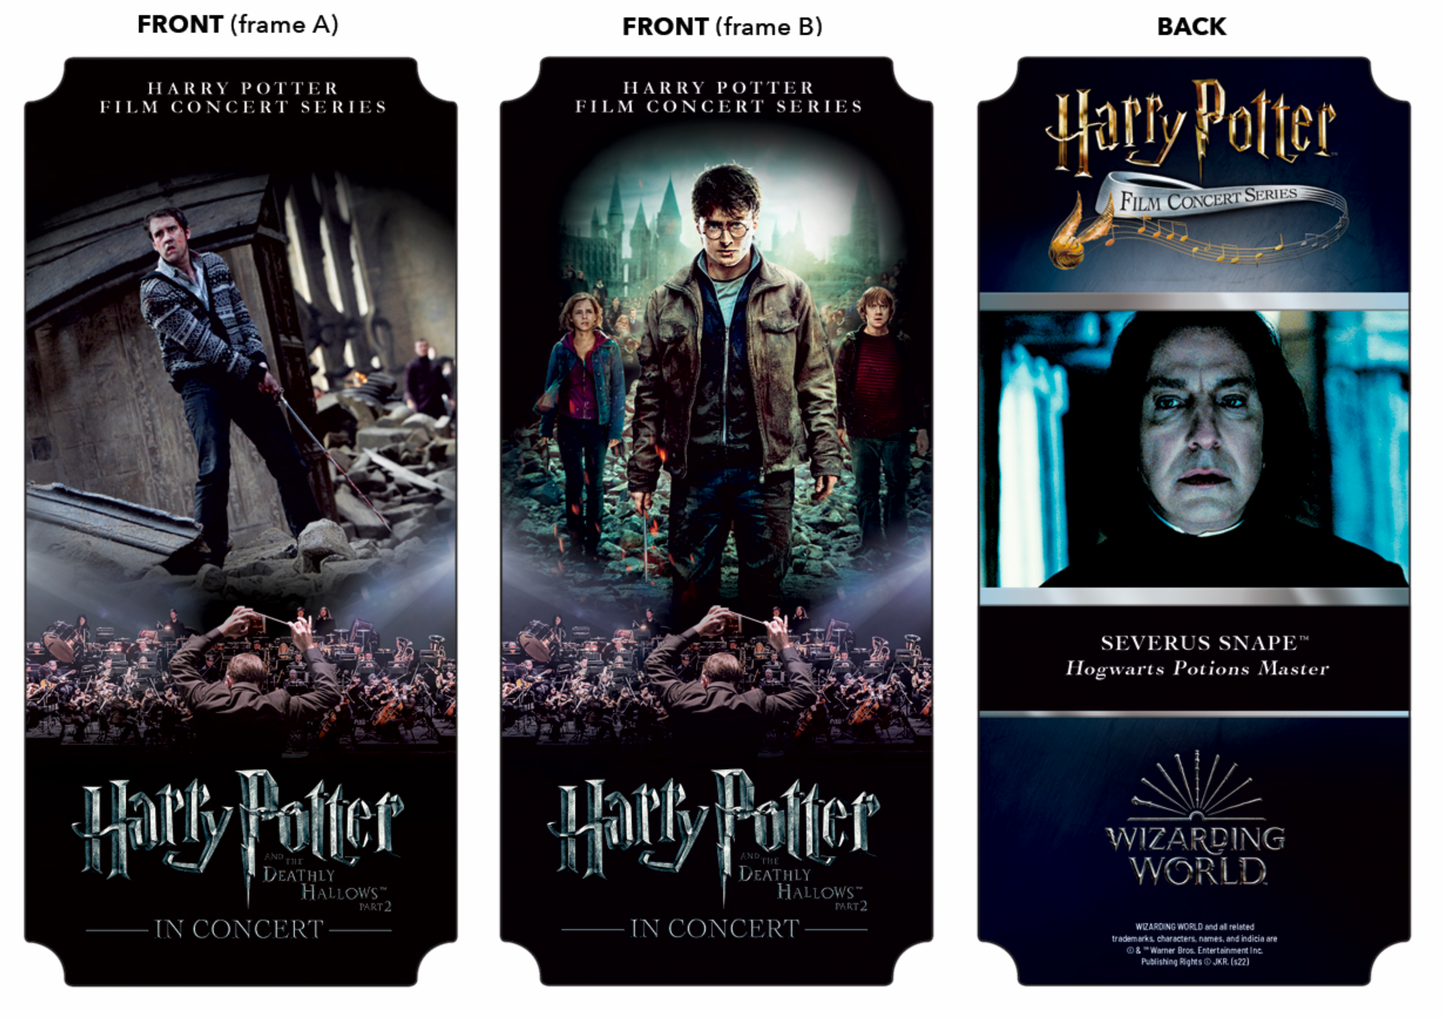 Harry Potter and the Deathly Hallows™ Part 2 in Concert Souvenir Ticket